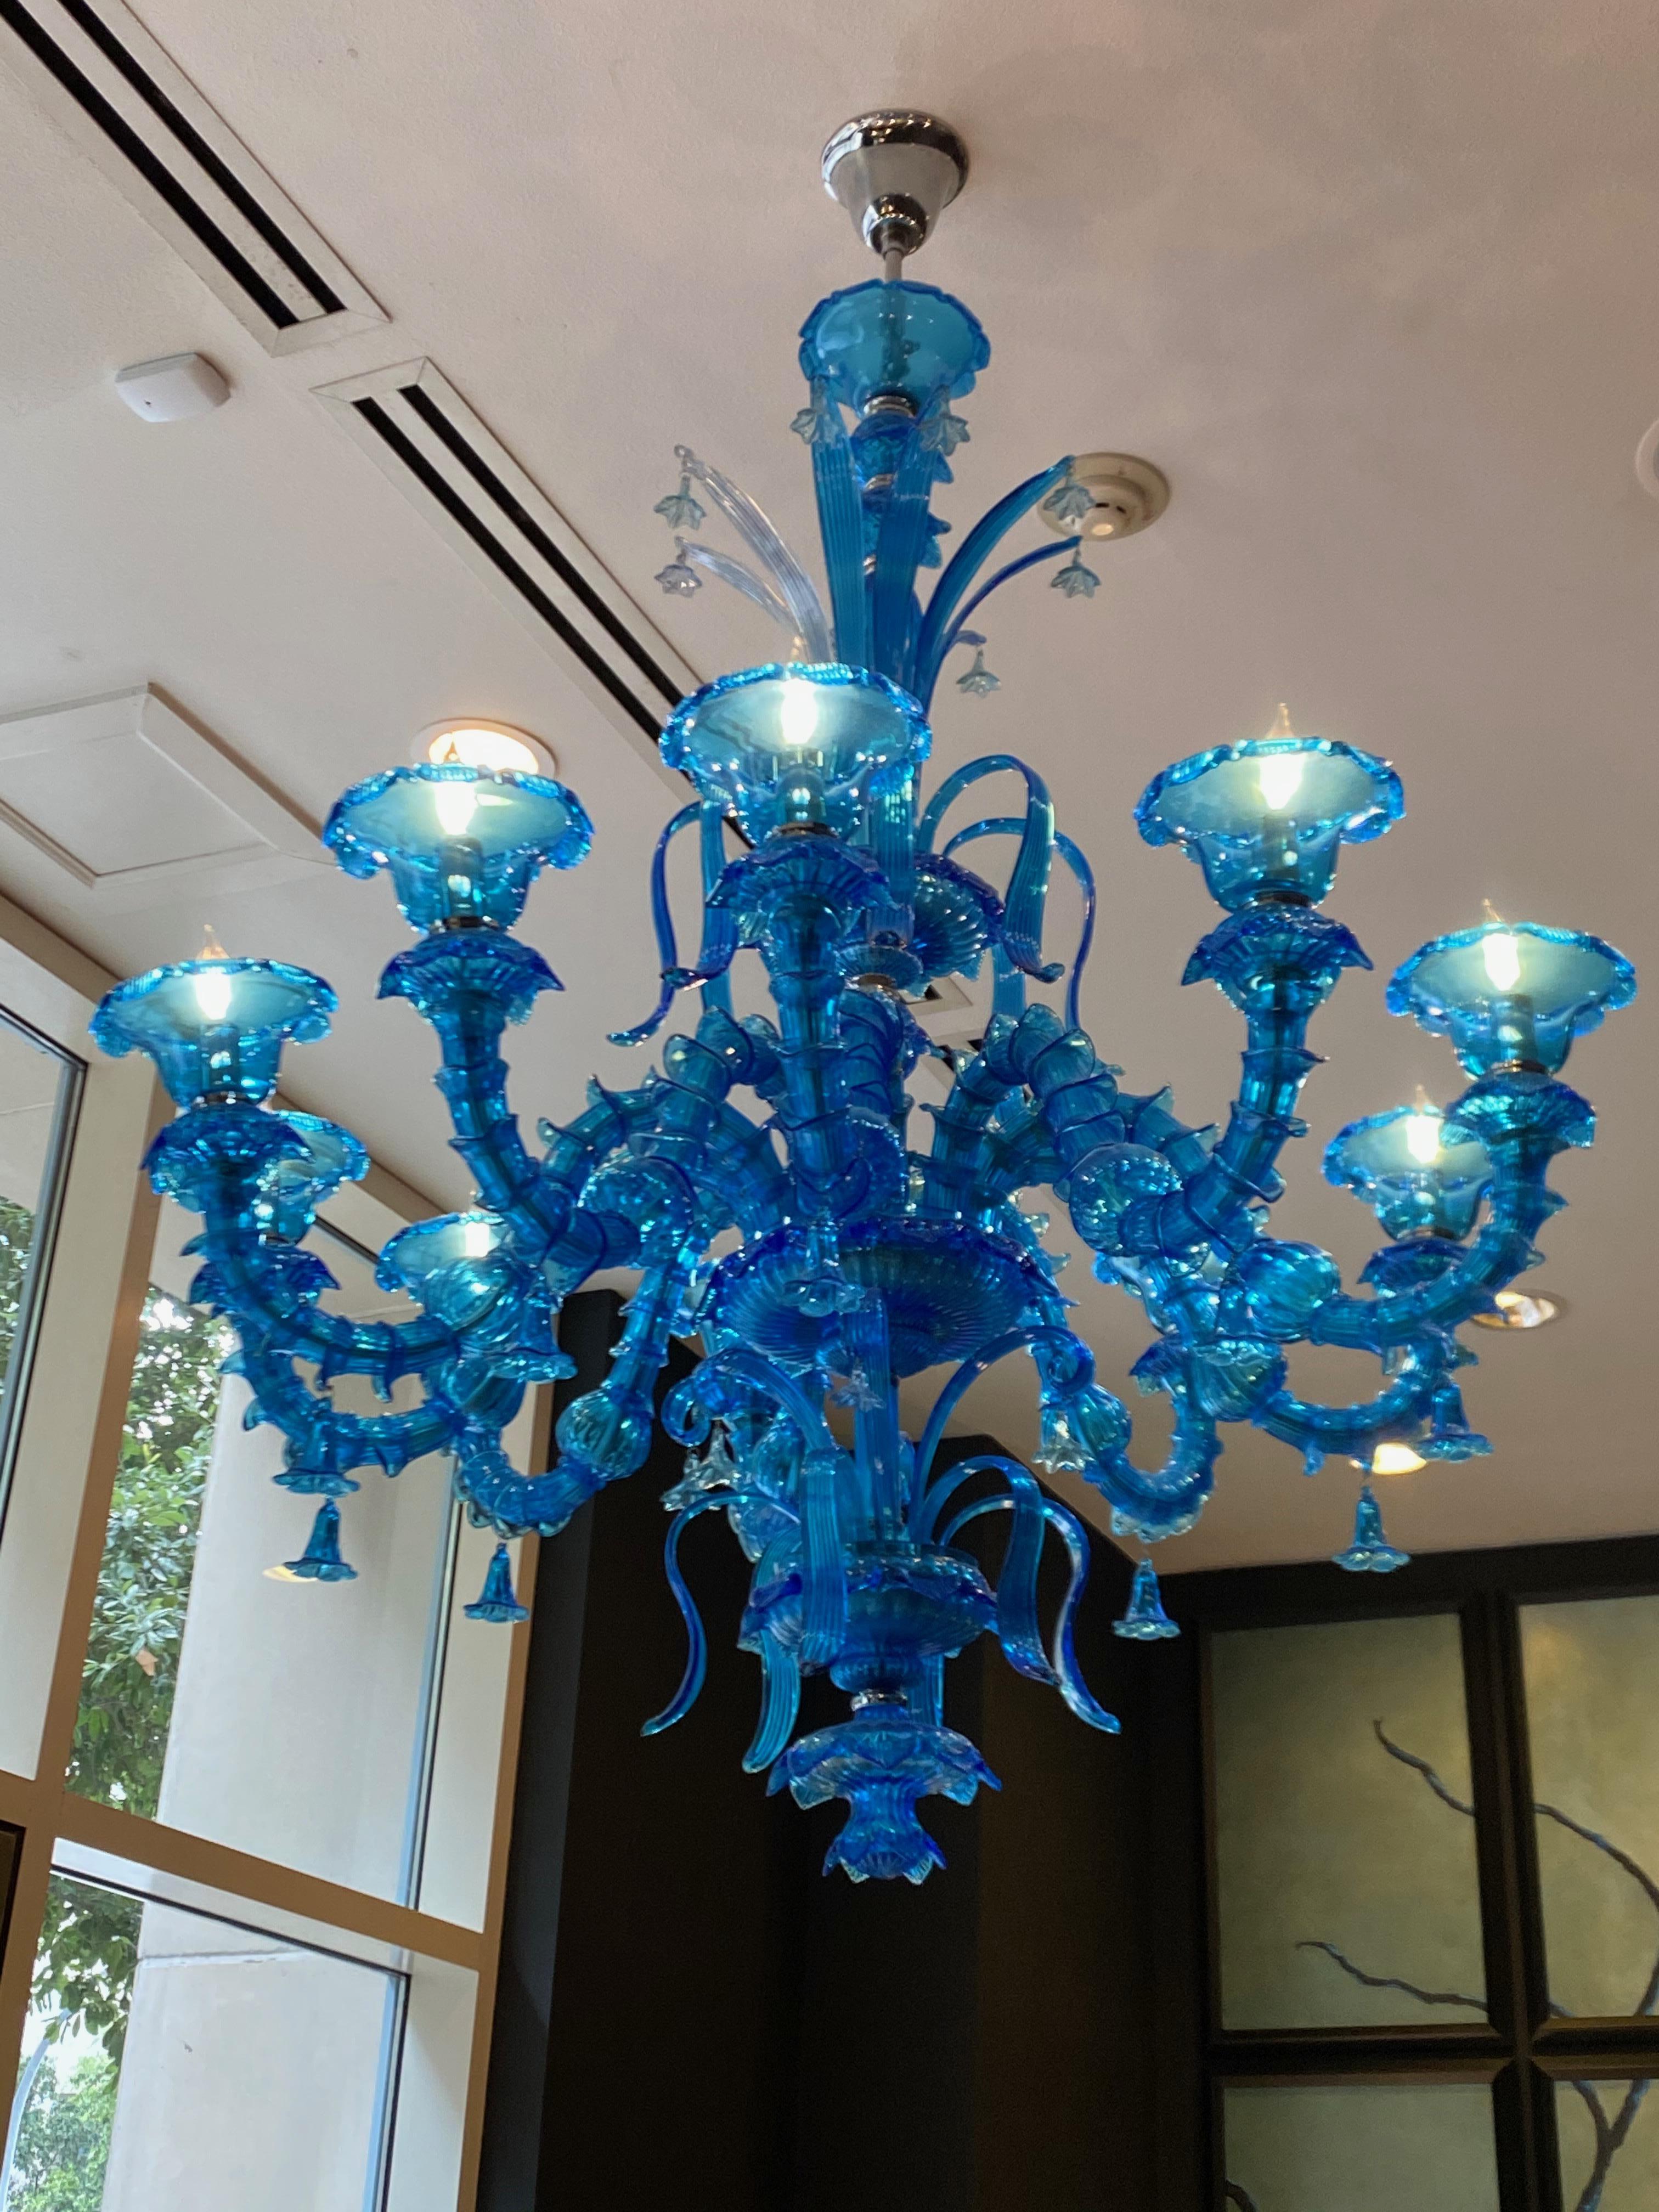 Blue Murano Glass Chandelier

10 lights and 10 arms with hanging flowers and leaves.